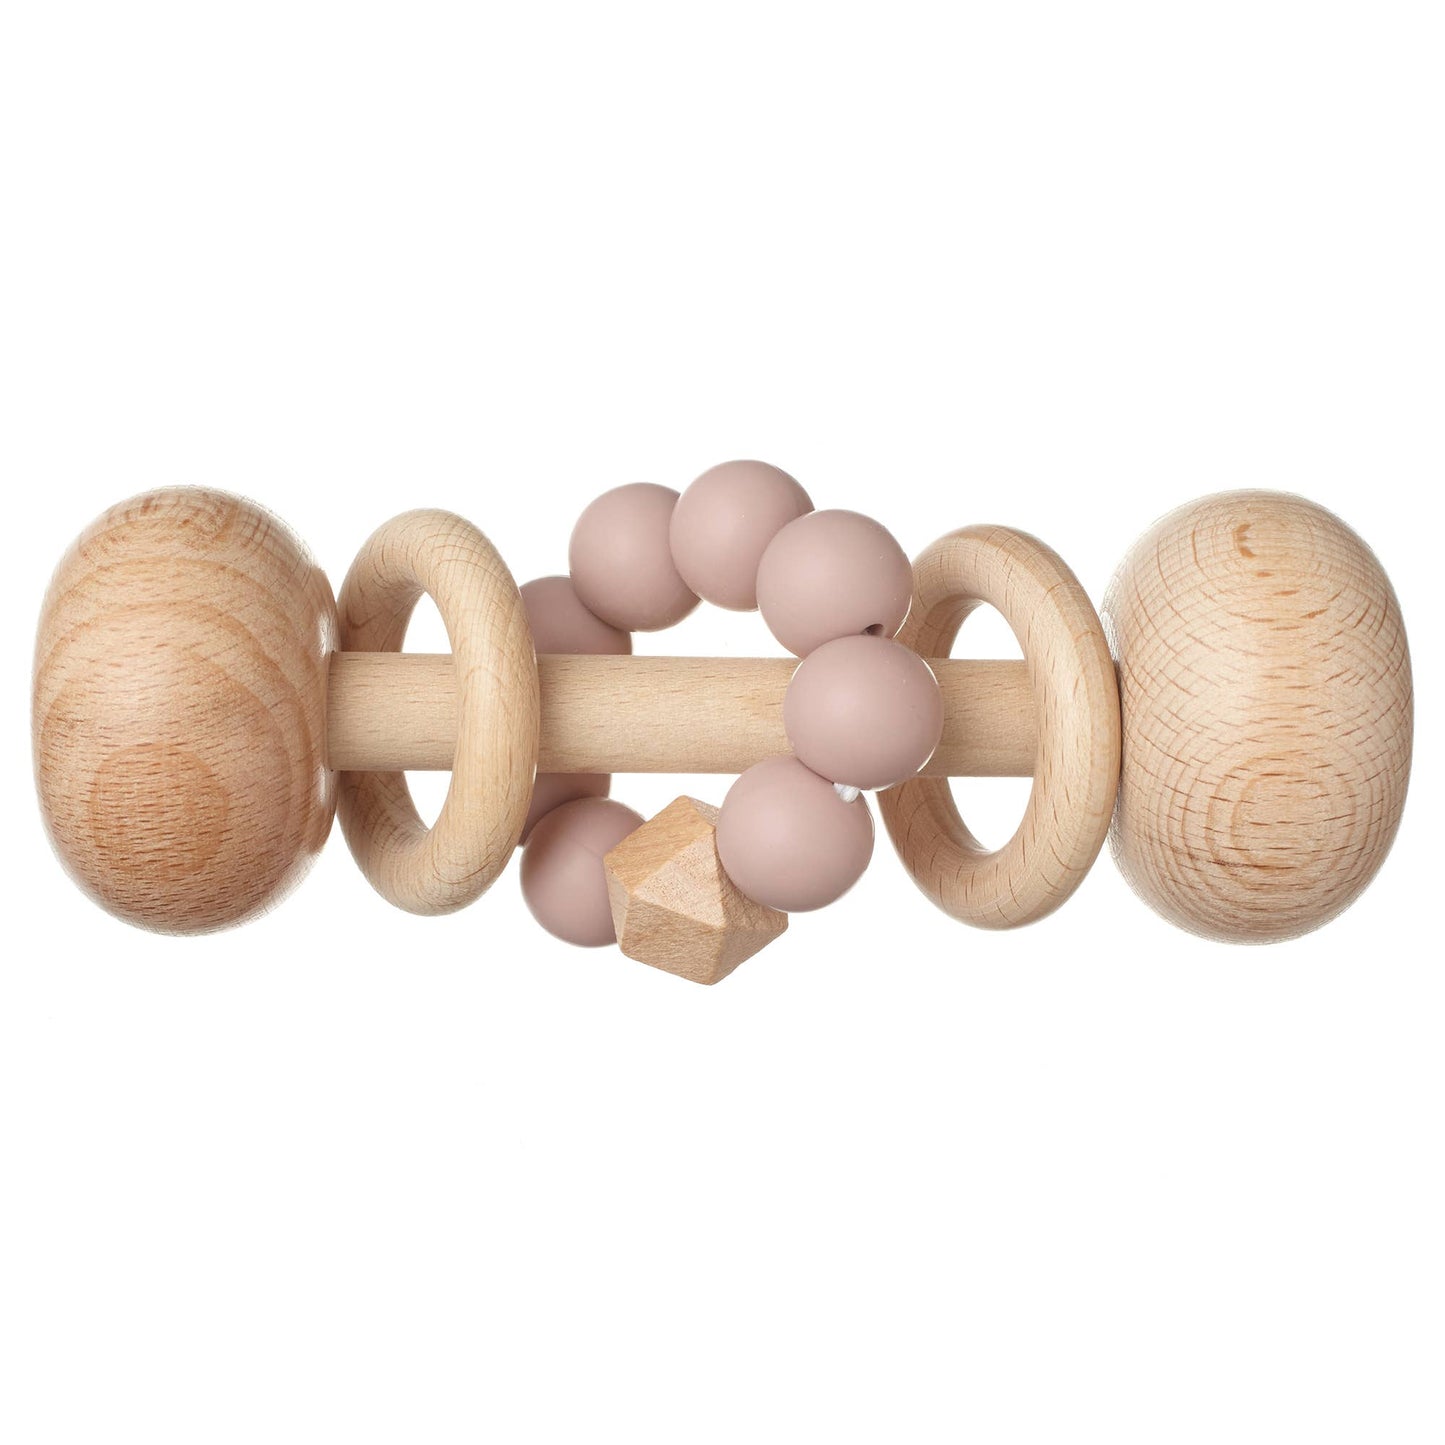 Wooden Rattle Toys for Babies with (Blush) Silicone Beads